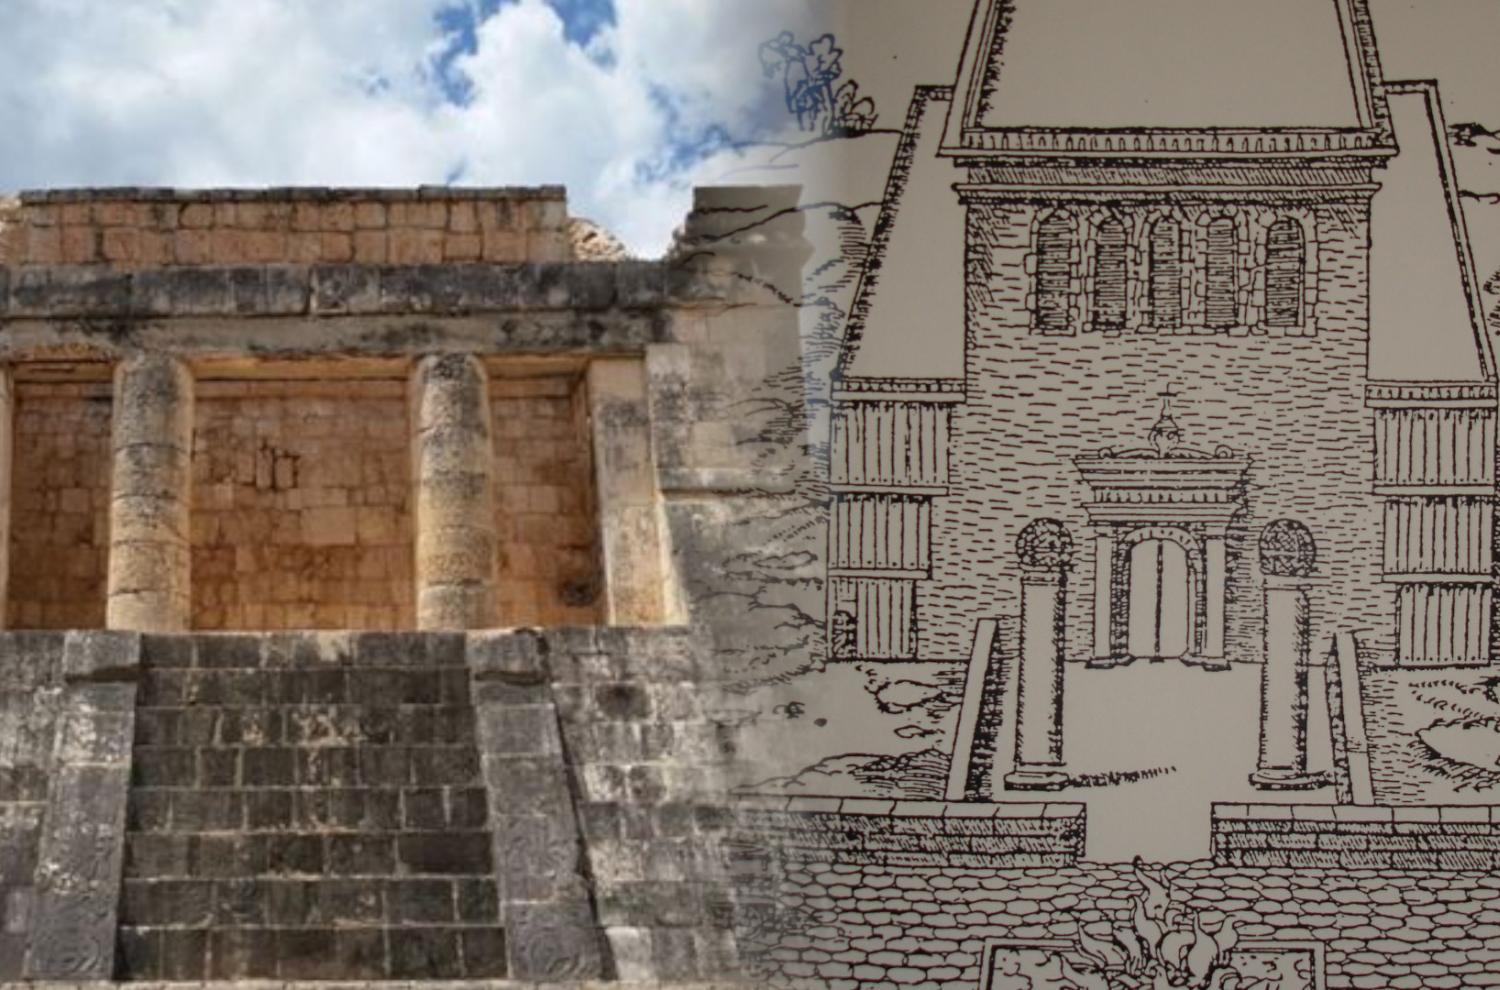 Collage of a photo of the Temple of the Bearded Man at Chichen Itza and a depiction of the temple of Solomon in Jerusalem by François Vatable.